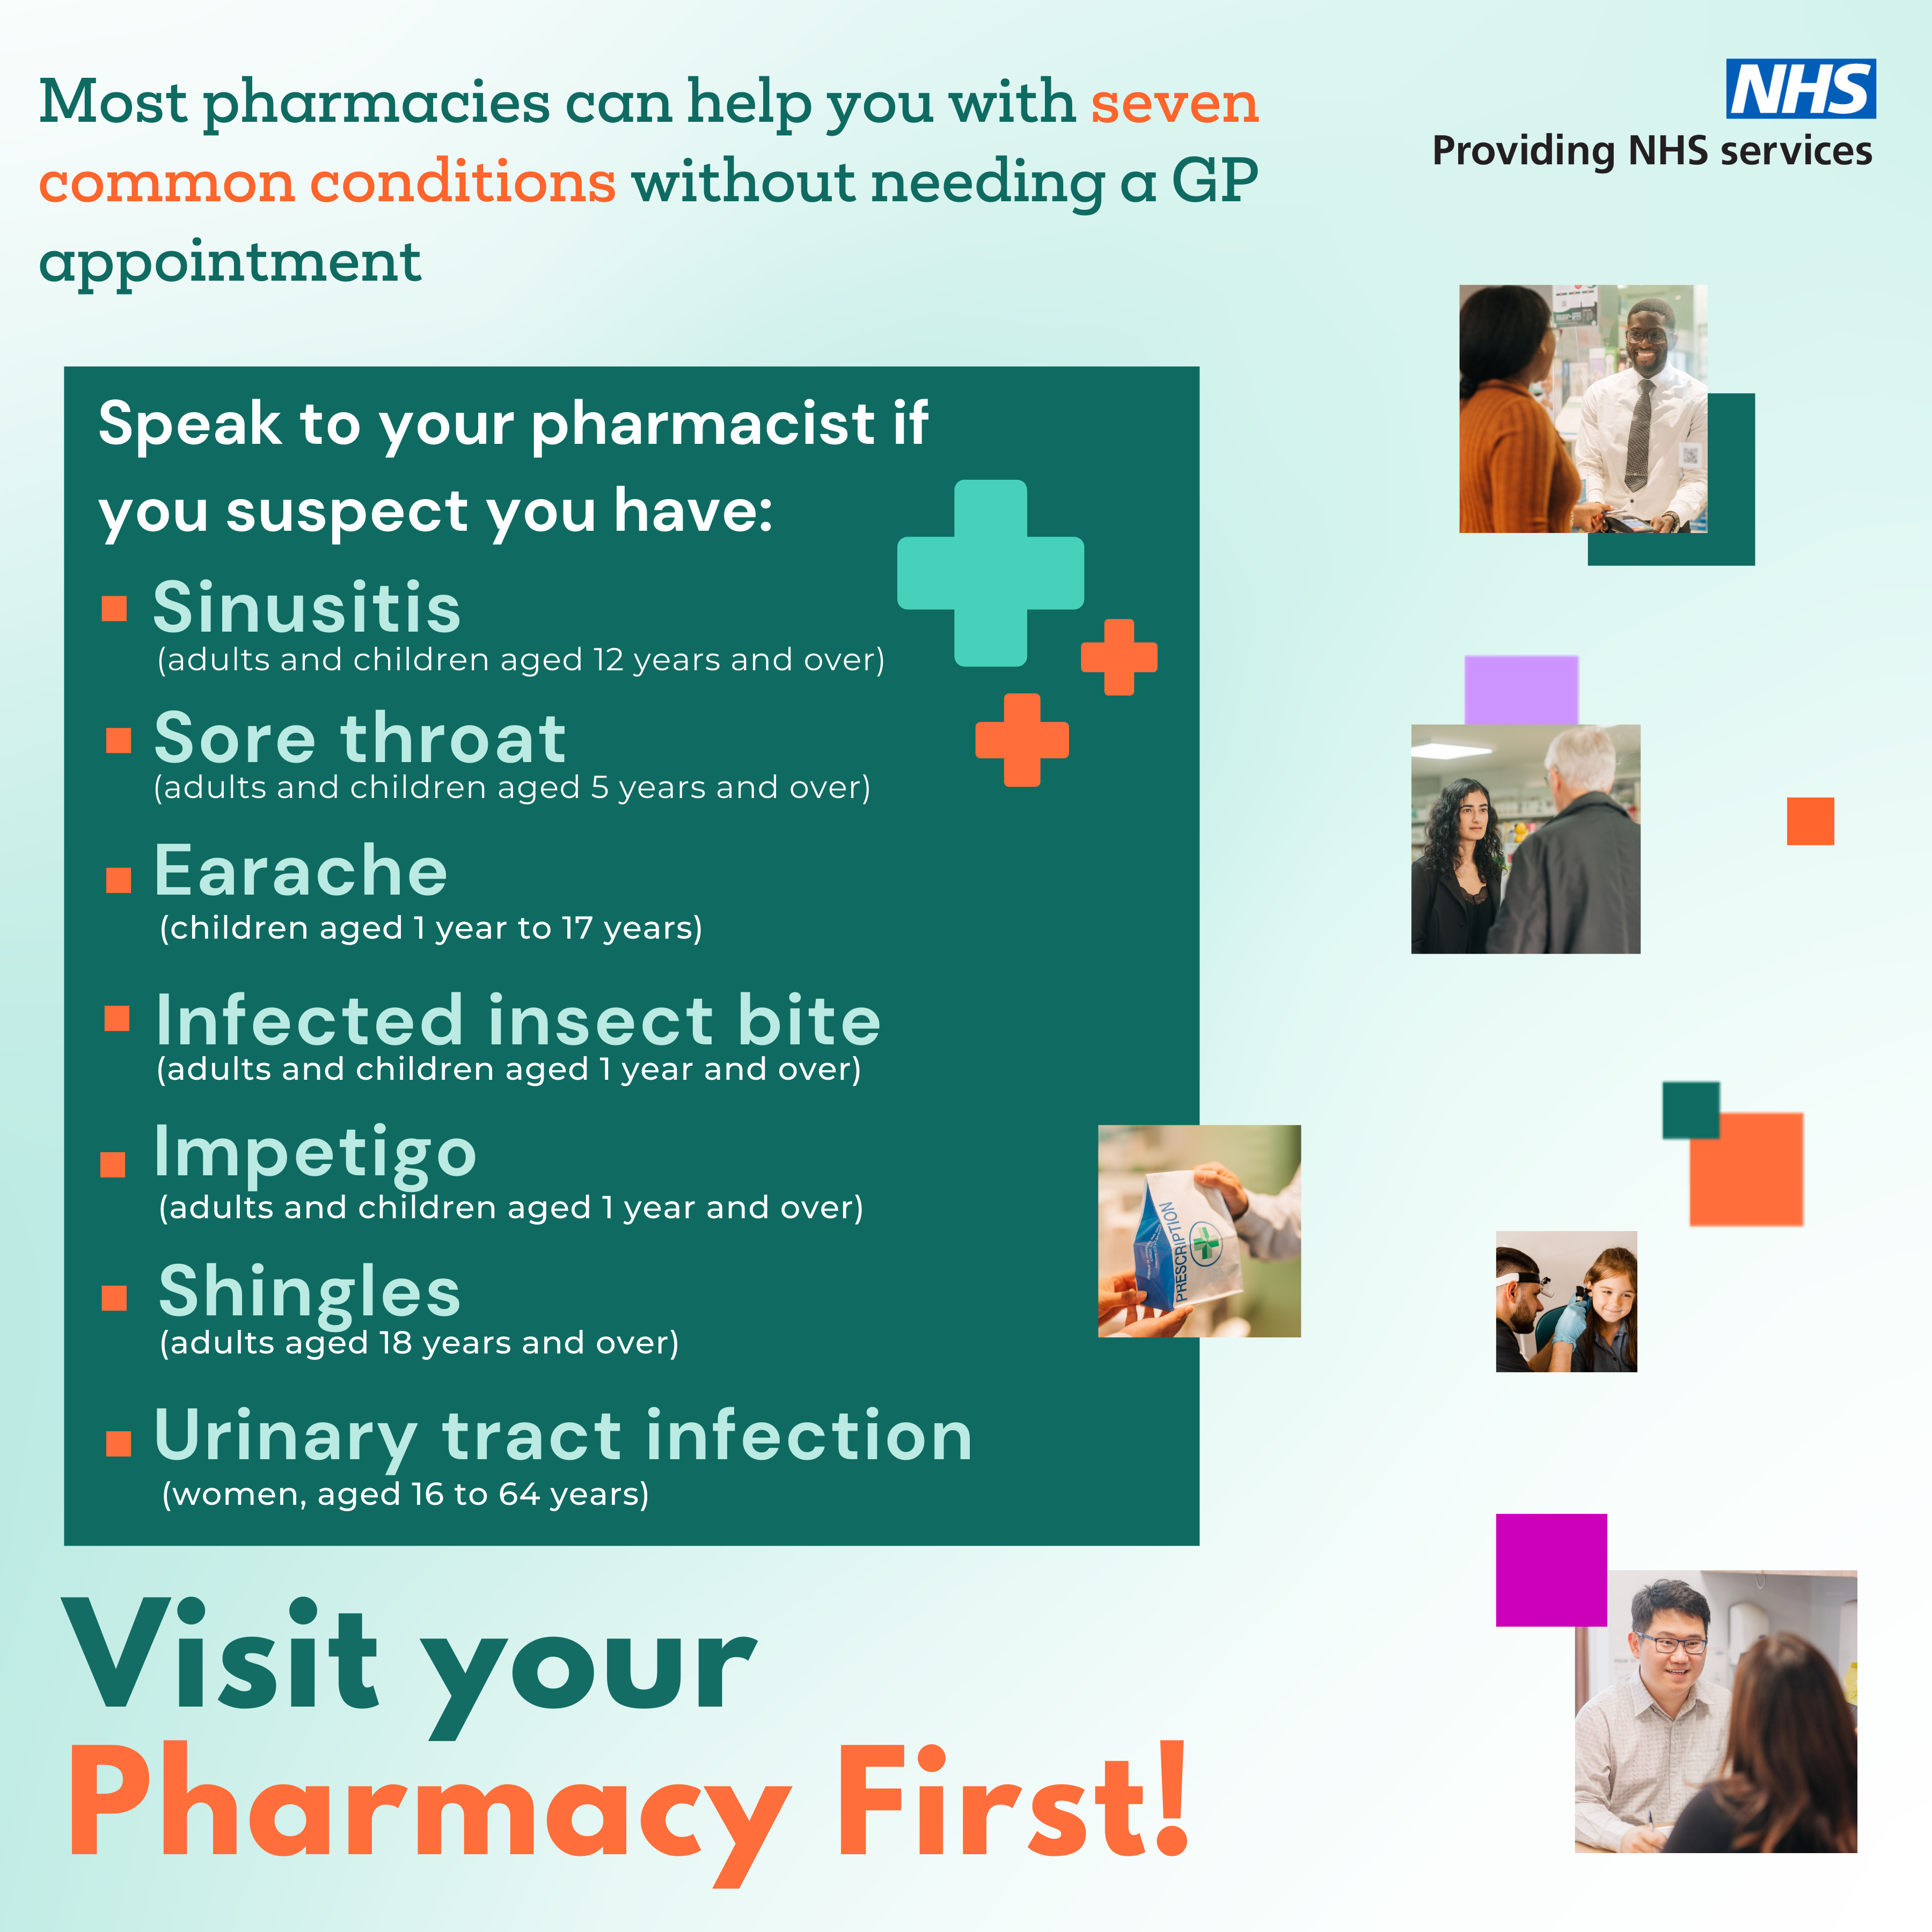 Pharmacy first information leaflet